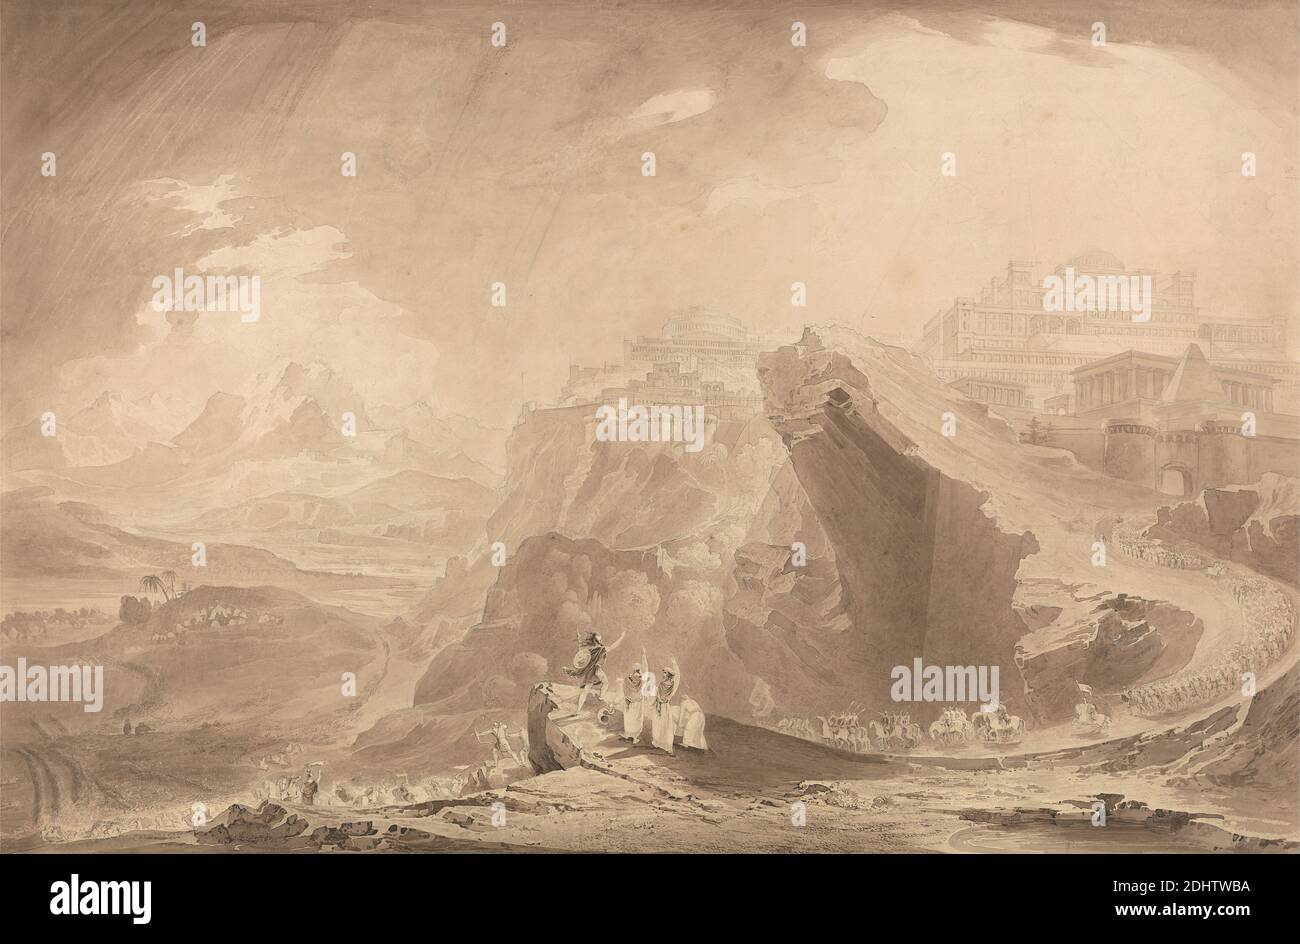 Joshua Commanding the Sun to Stand Still, John Martin, 1789–1854, British, 1818, Graphite, brown wash, scratching out and graphite on medium, slightly textured, cream wove paper, Sheet: 16 × 24 1/8 inches (40.6 × 61.3 cm), army, by night Joshua and his army come to the rescue of Gibeon, clouds, landscape, night, pyramid (tomb), religious and mythological subject, sun, Al-Jib, Israel Stock Photo